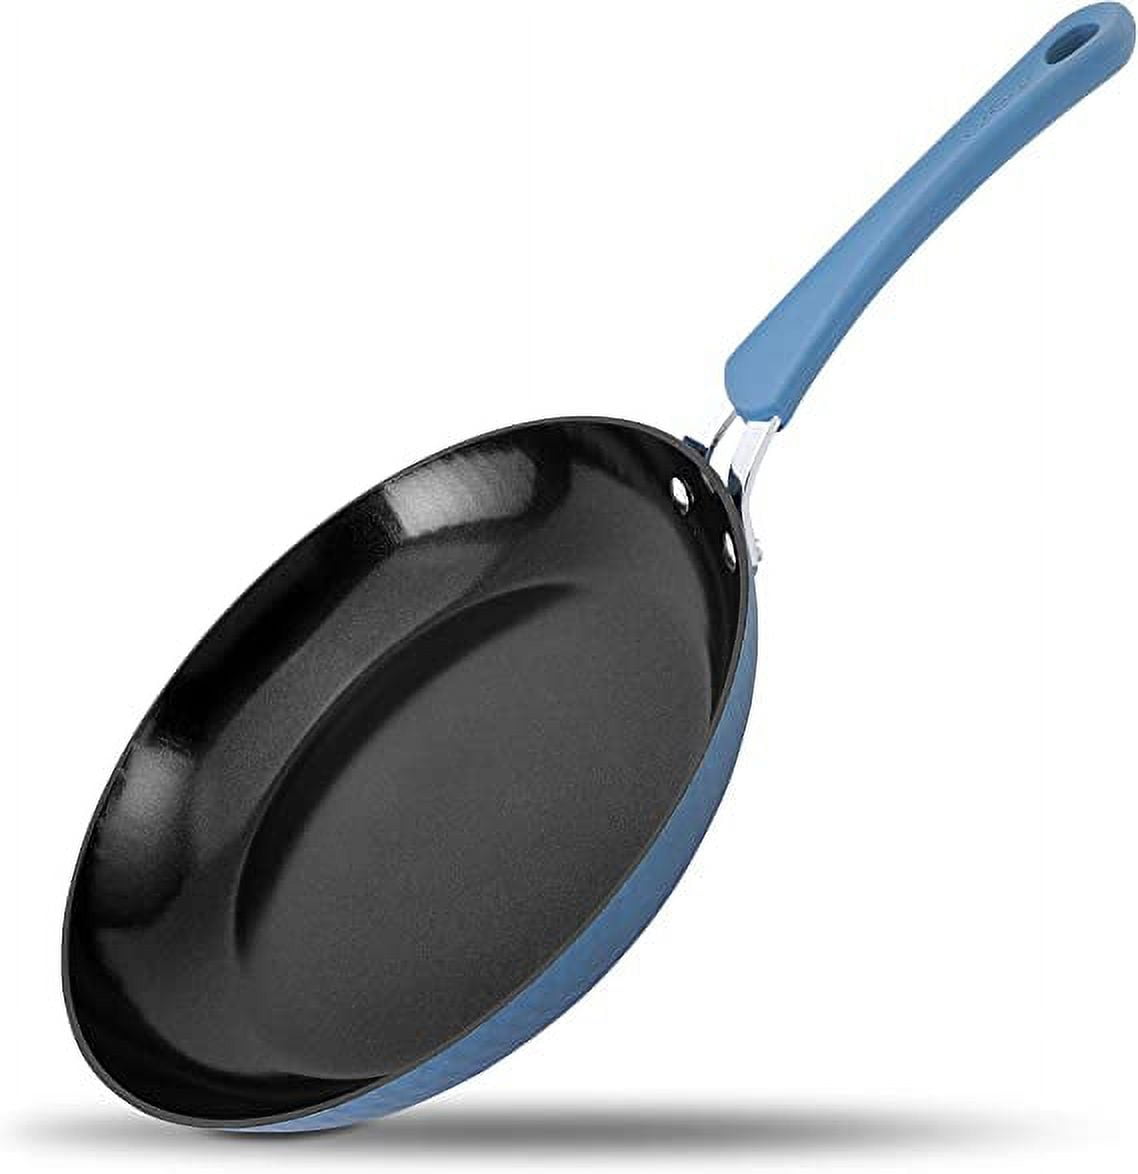 NutriChef 14 Extra Large Fry Pan - Skillet Nonstick Frying Pan with  Silicone Handle, Ceramic Coating, Blue Silicone Handle, Stain-Resistant And  Easy